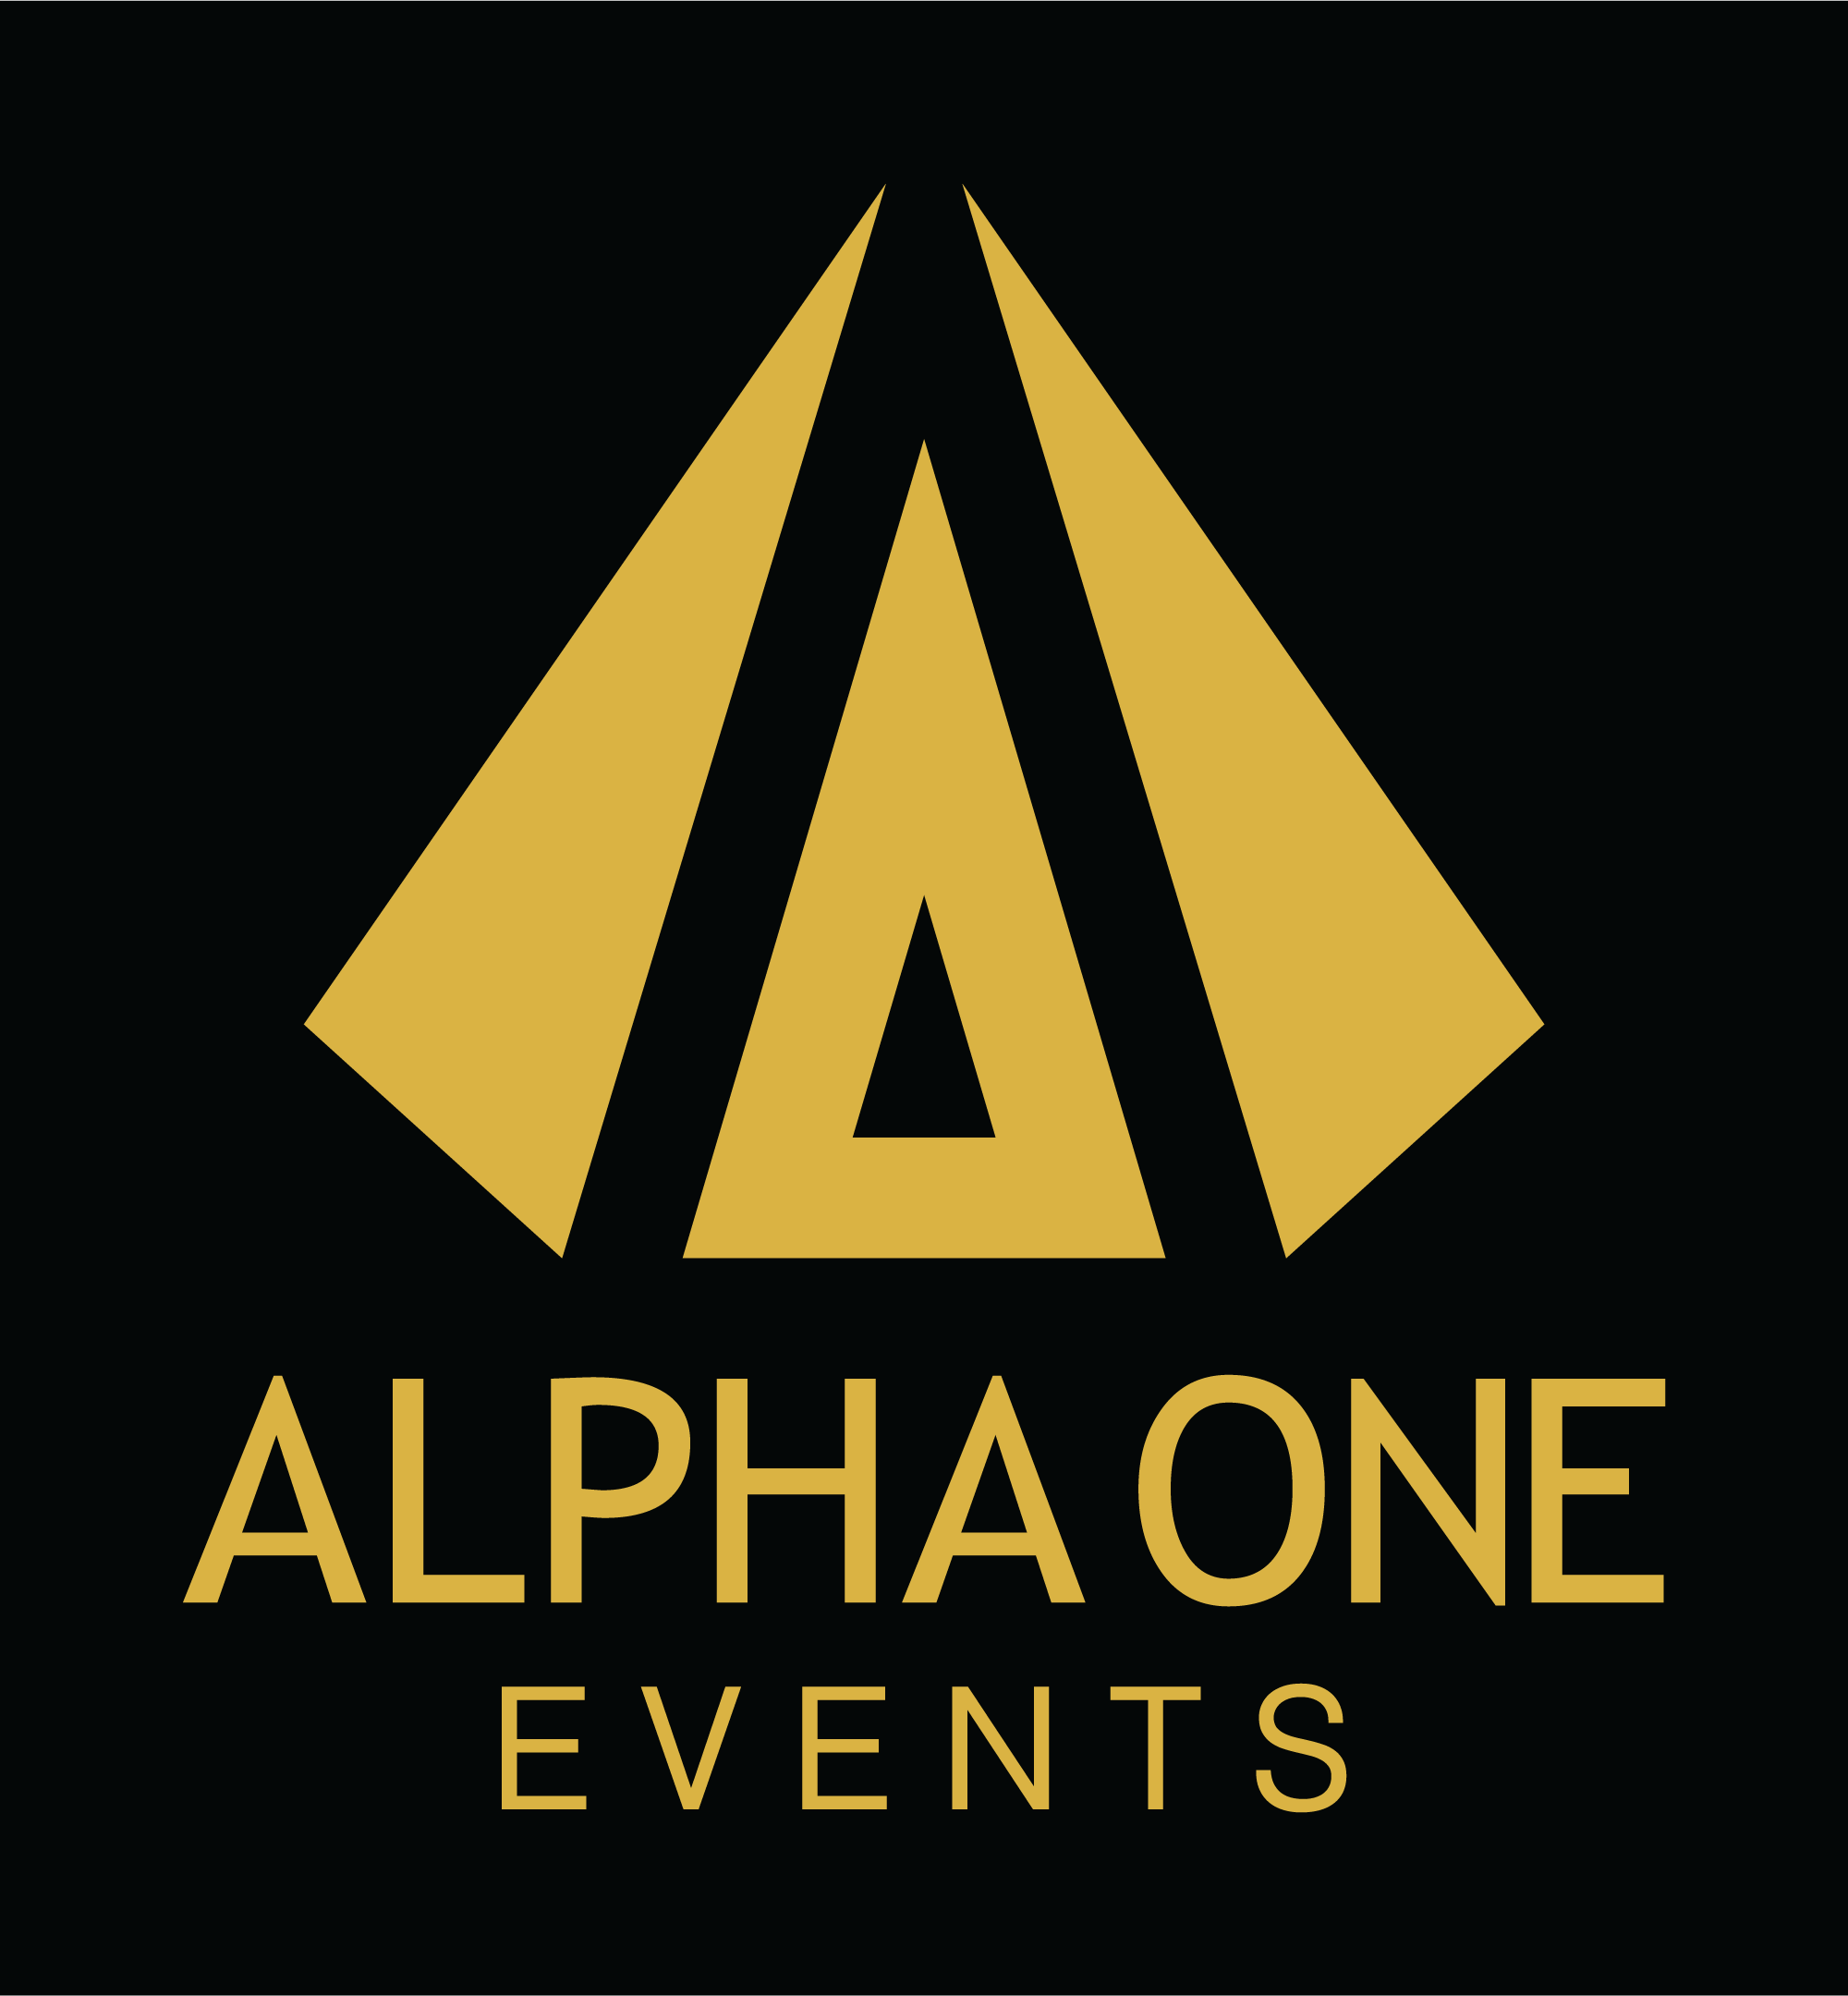 Alpha One Events announce NETinfo Plc as Associate Sponsor at the Middle East NXT Banking Summit